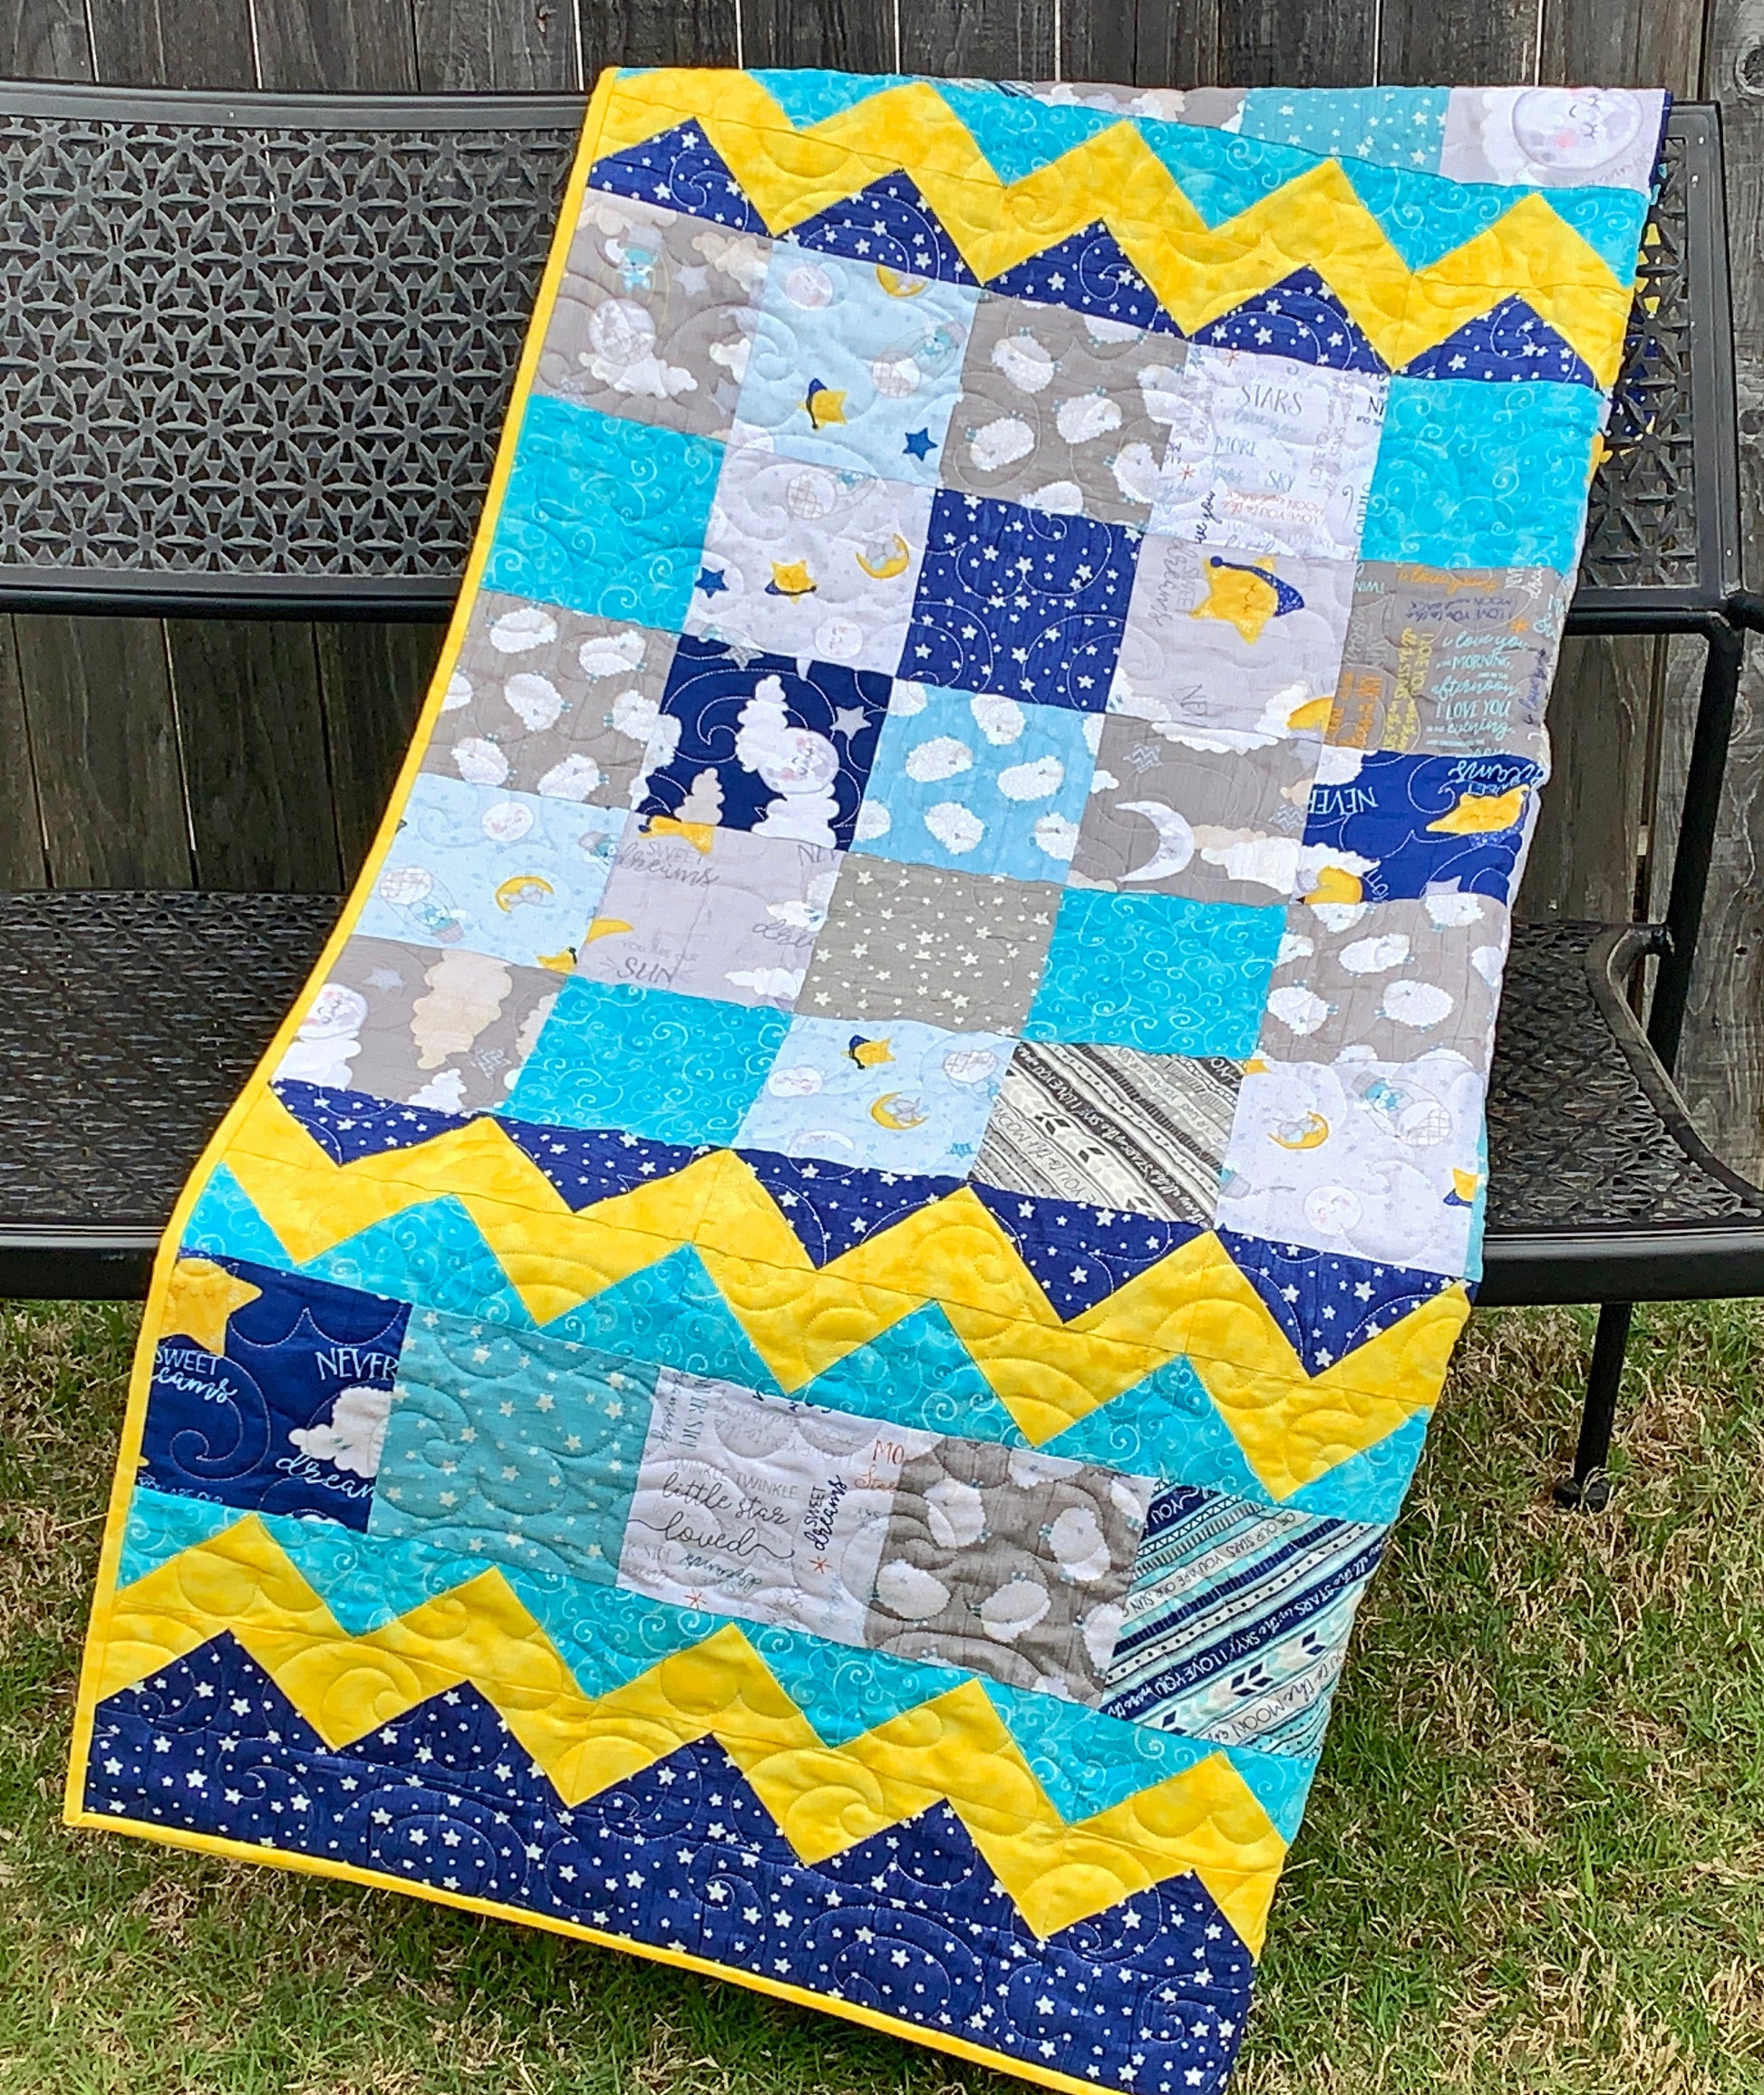 Baby Blocks charm square baby quilt pattern with yellow top and bottom zig-zag rows that look like rick-rack with rows of patchwork squares in between. Quilt is trimmed in blue and yellow and is shown displayed on a bench.